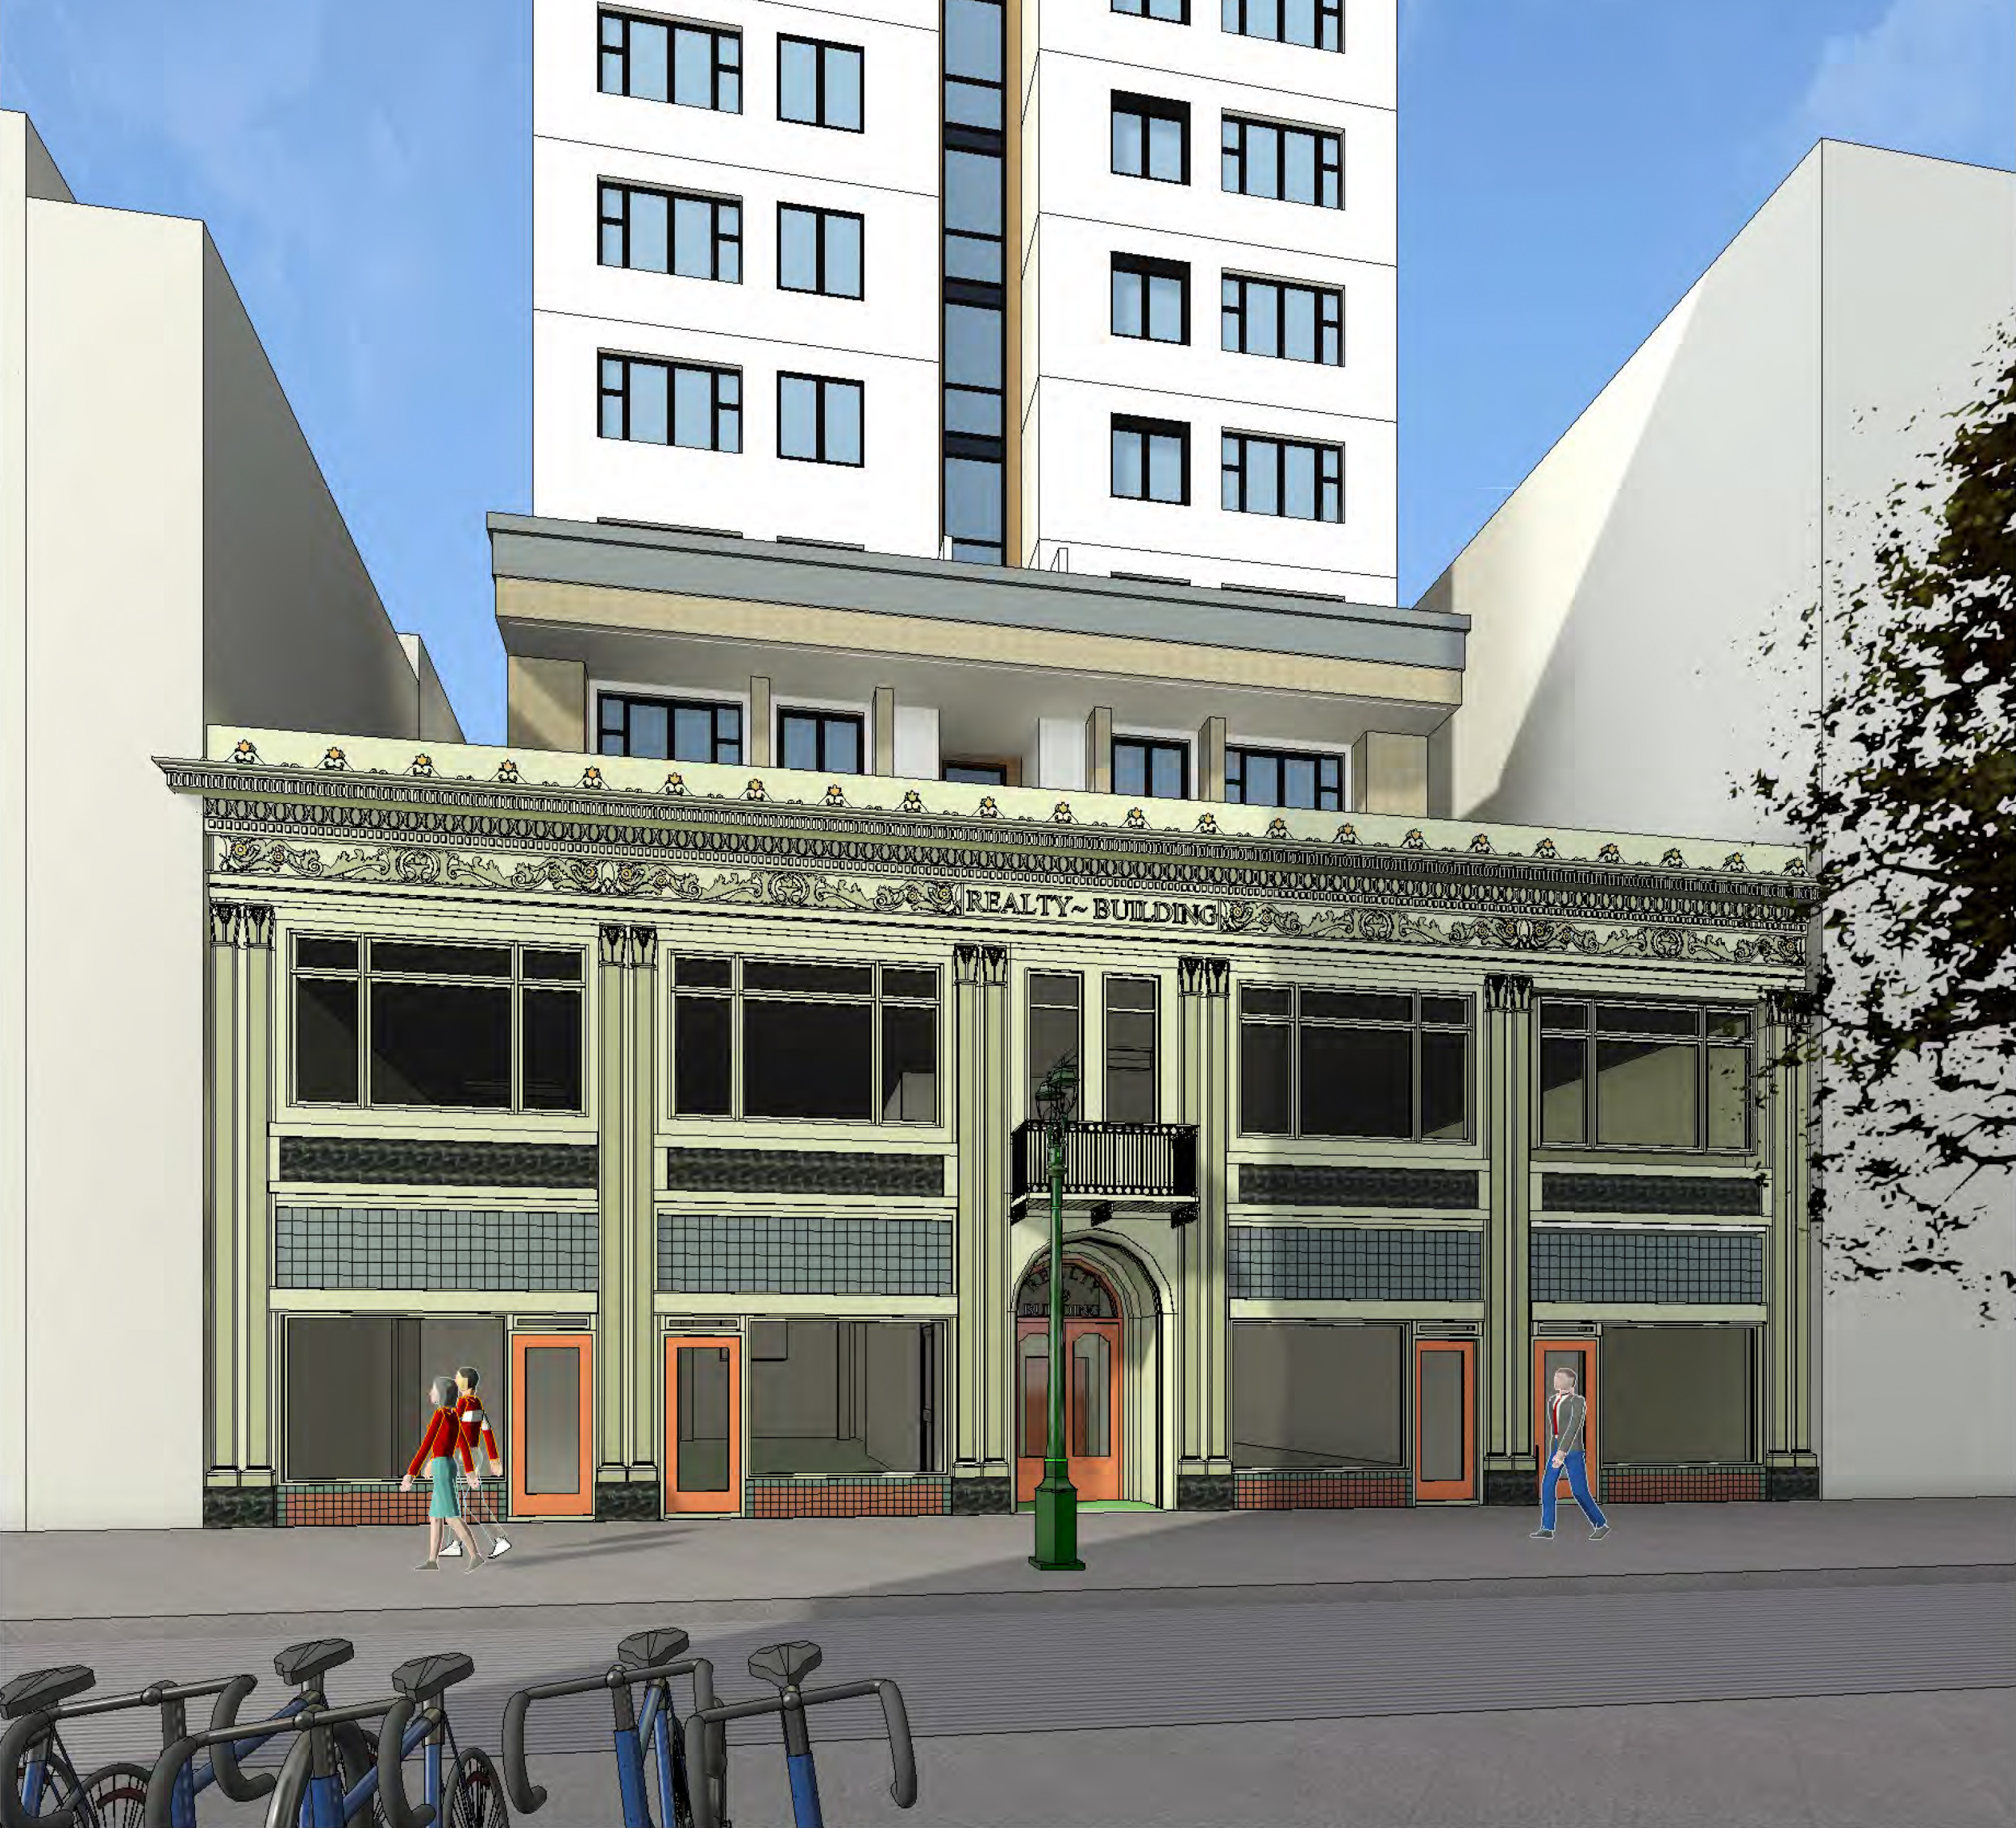 19 North 2nd Street podium view of the 1925-built Realty Building, illustration by Anderson Architects